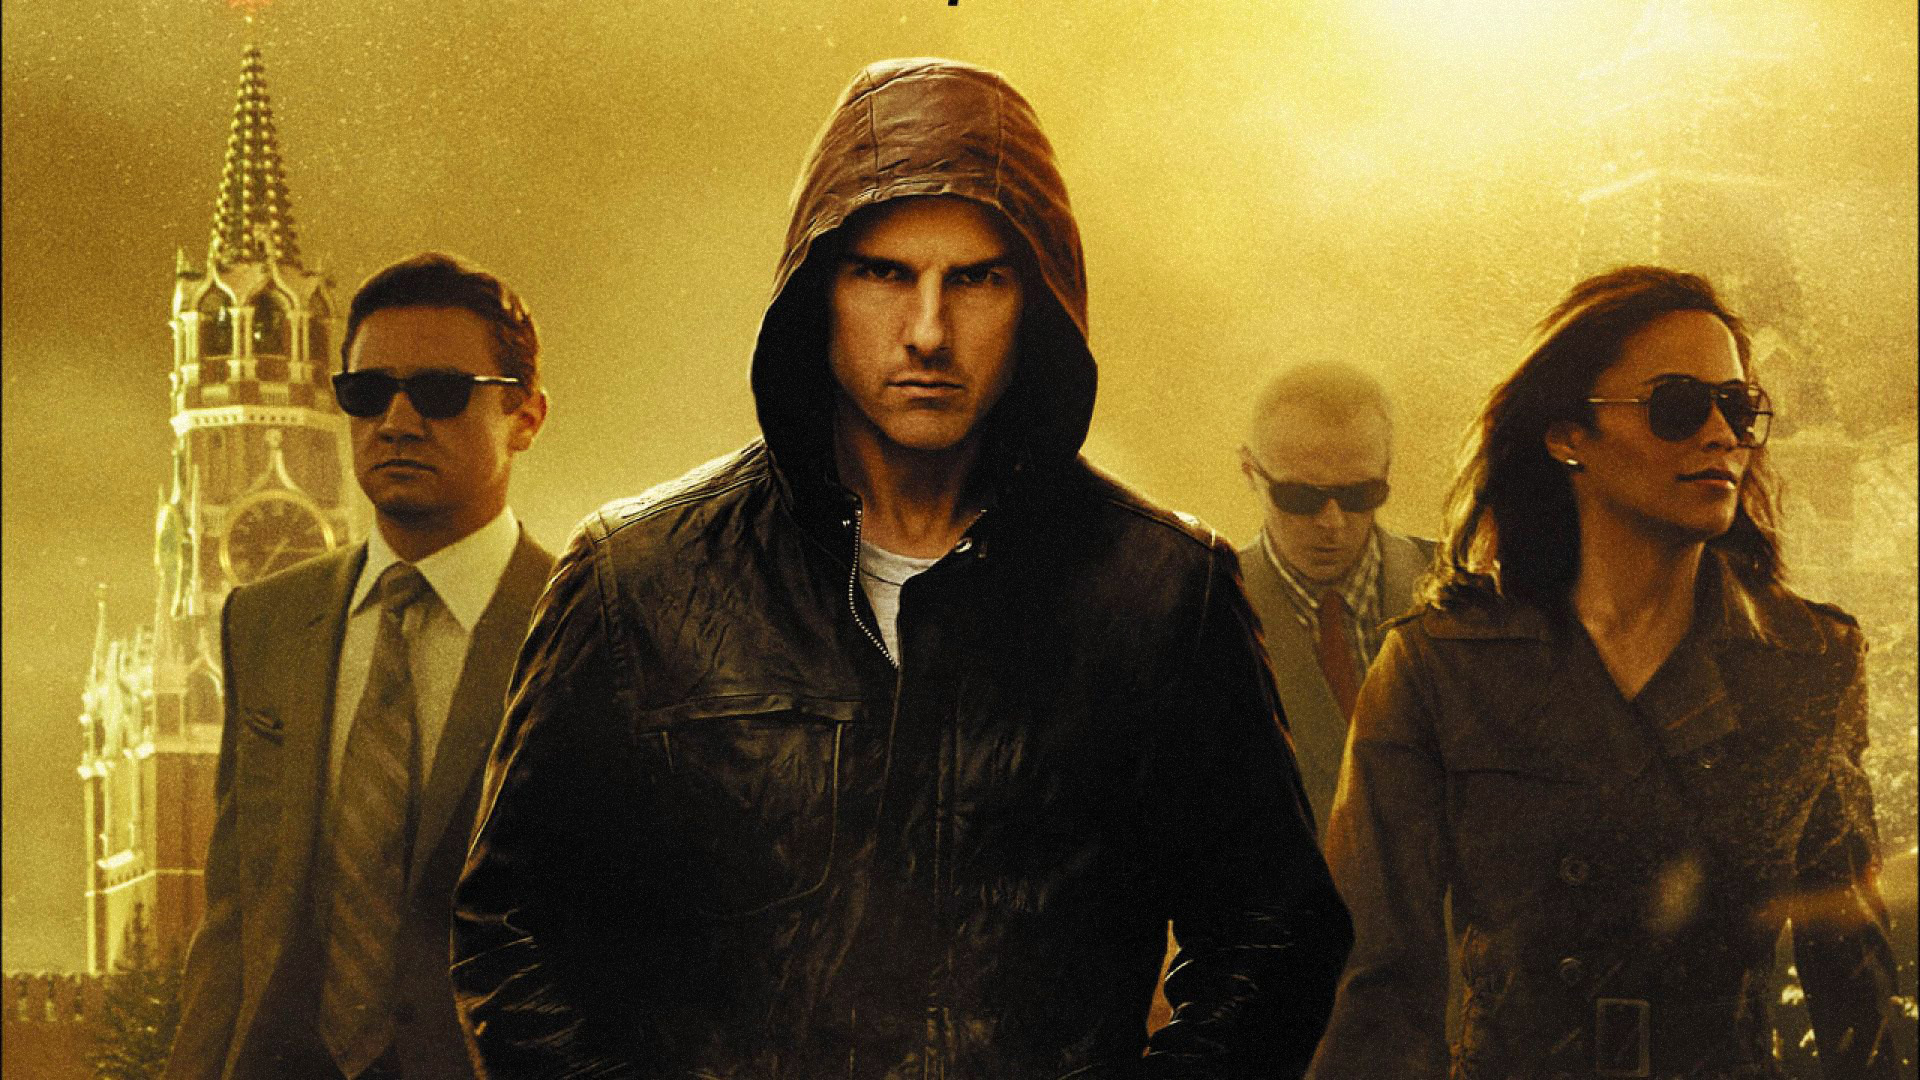 'Mission Impossible 5' will have Jeremy Renner back, film in London | The Global ...1920 x 1080